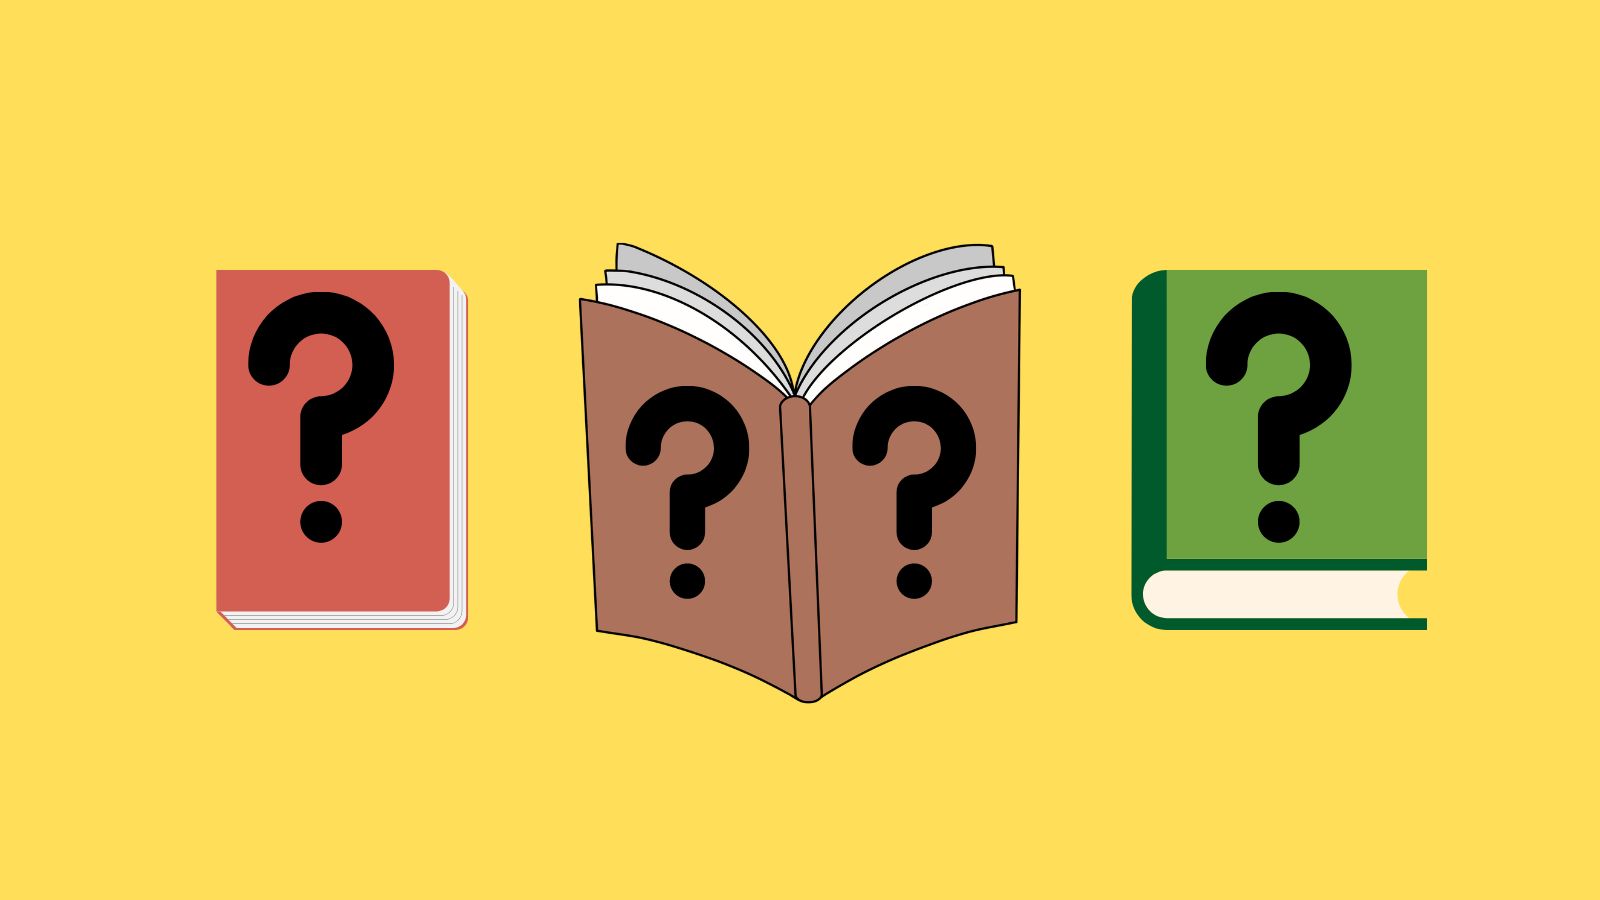 Three books with question marks on the covers with a yellow background.